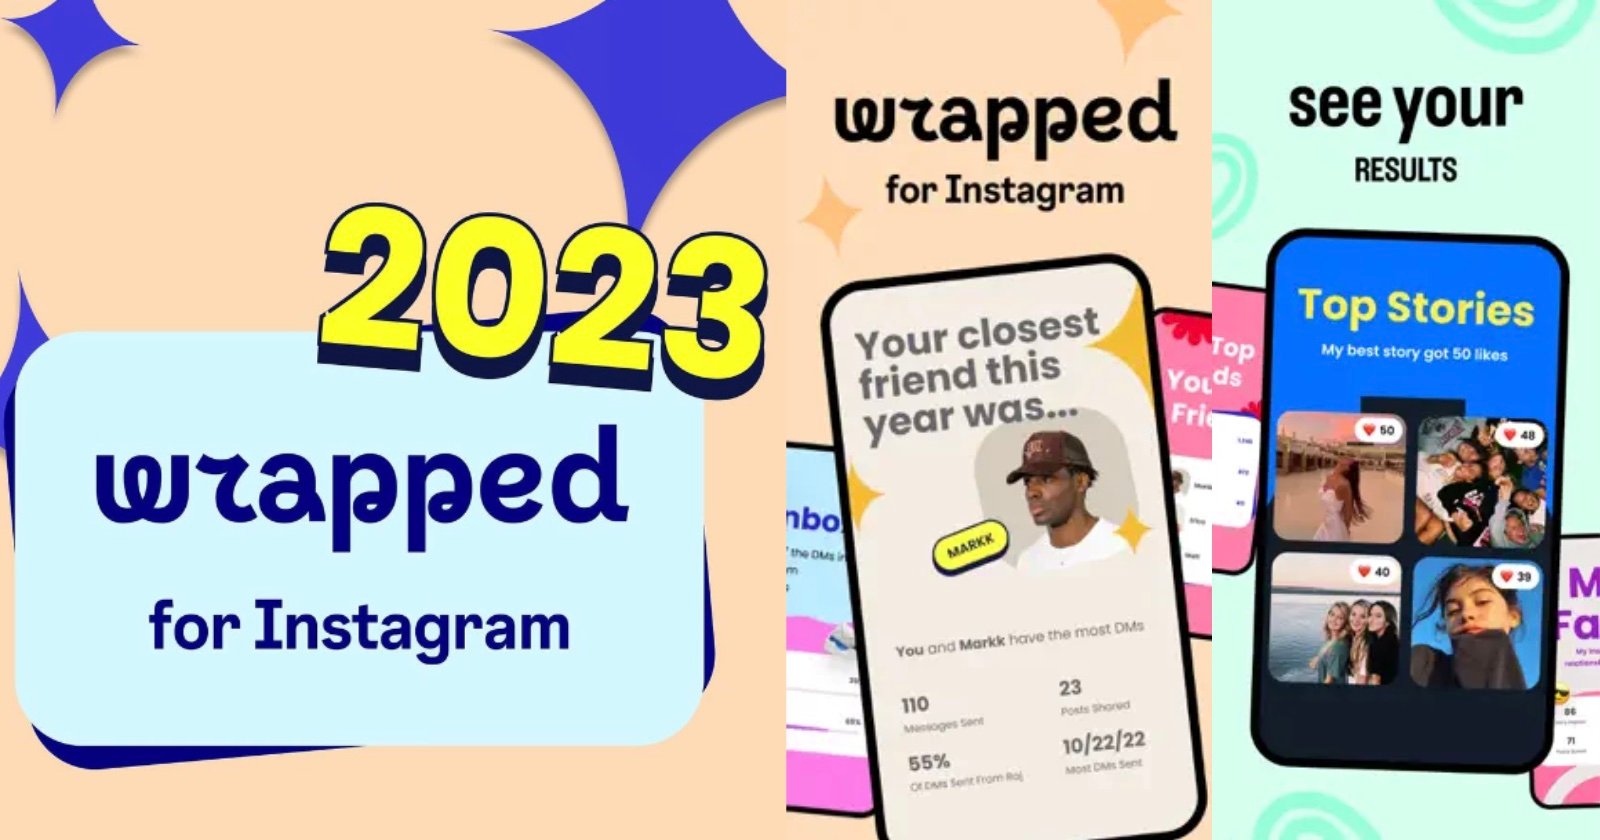 Wrapped App Says It Shows Instagram Users Who are Looking at Their Profile